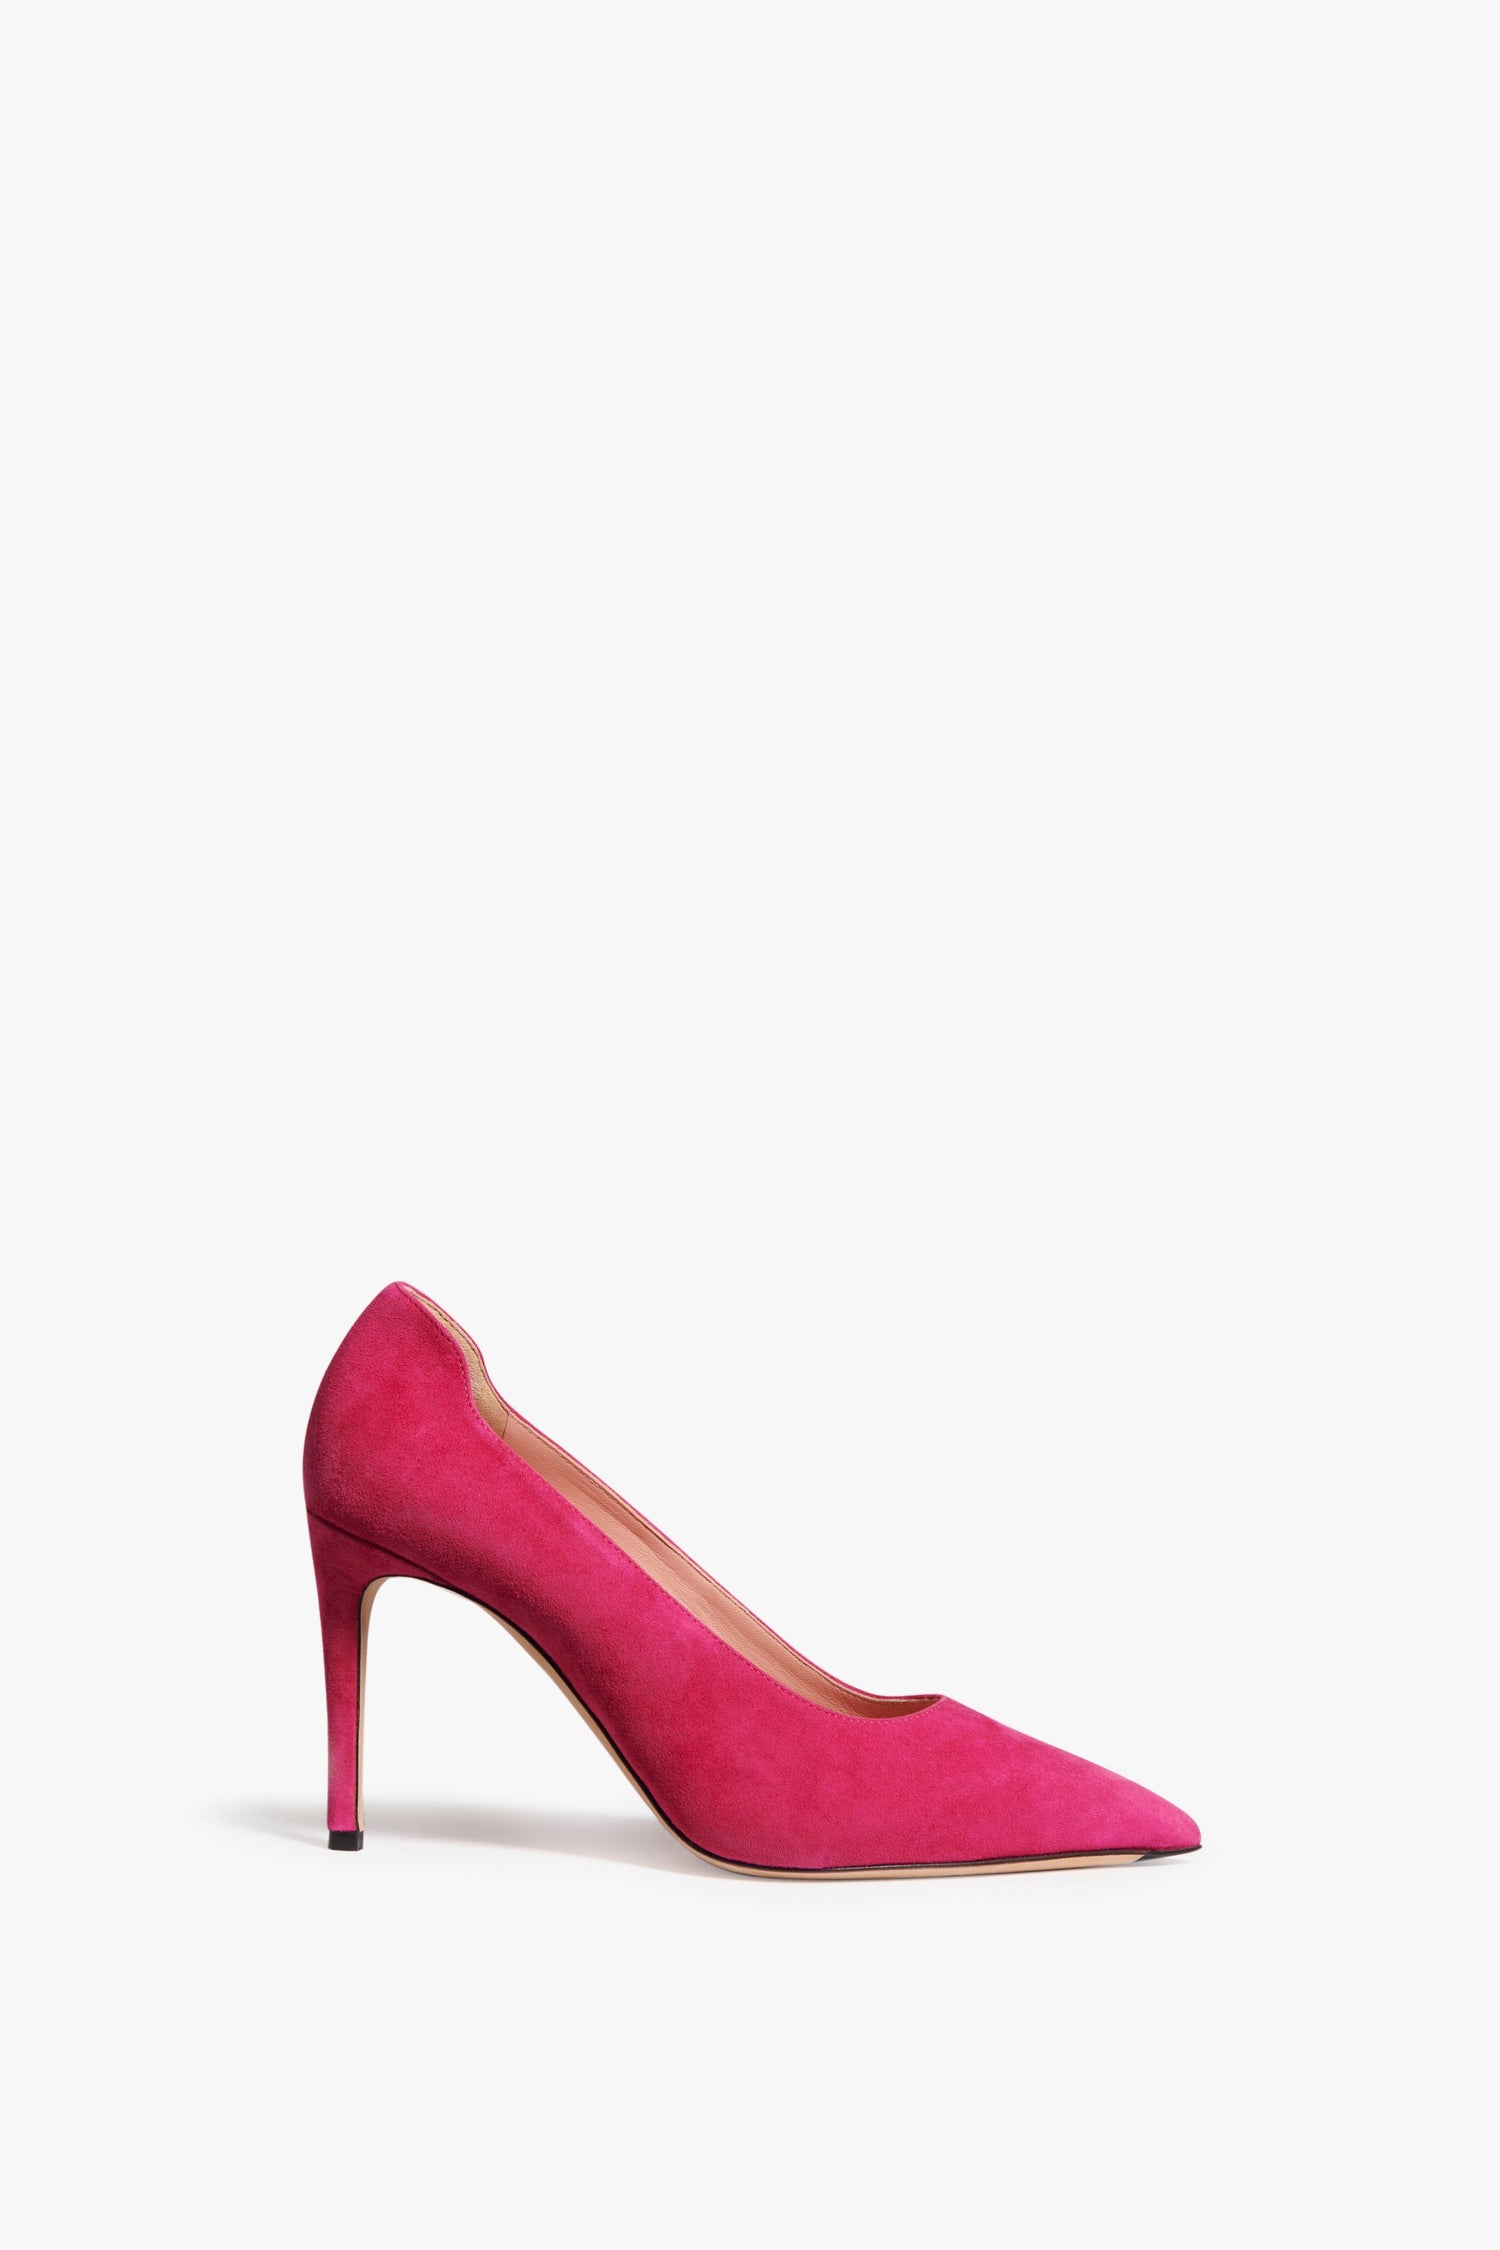 The VB Pump 90 in fuchsia pink suede is finished with a sharp, versatile, thin heel and pointed toe design. An iconic, classic style from Victoria Beckham Footwear.